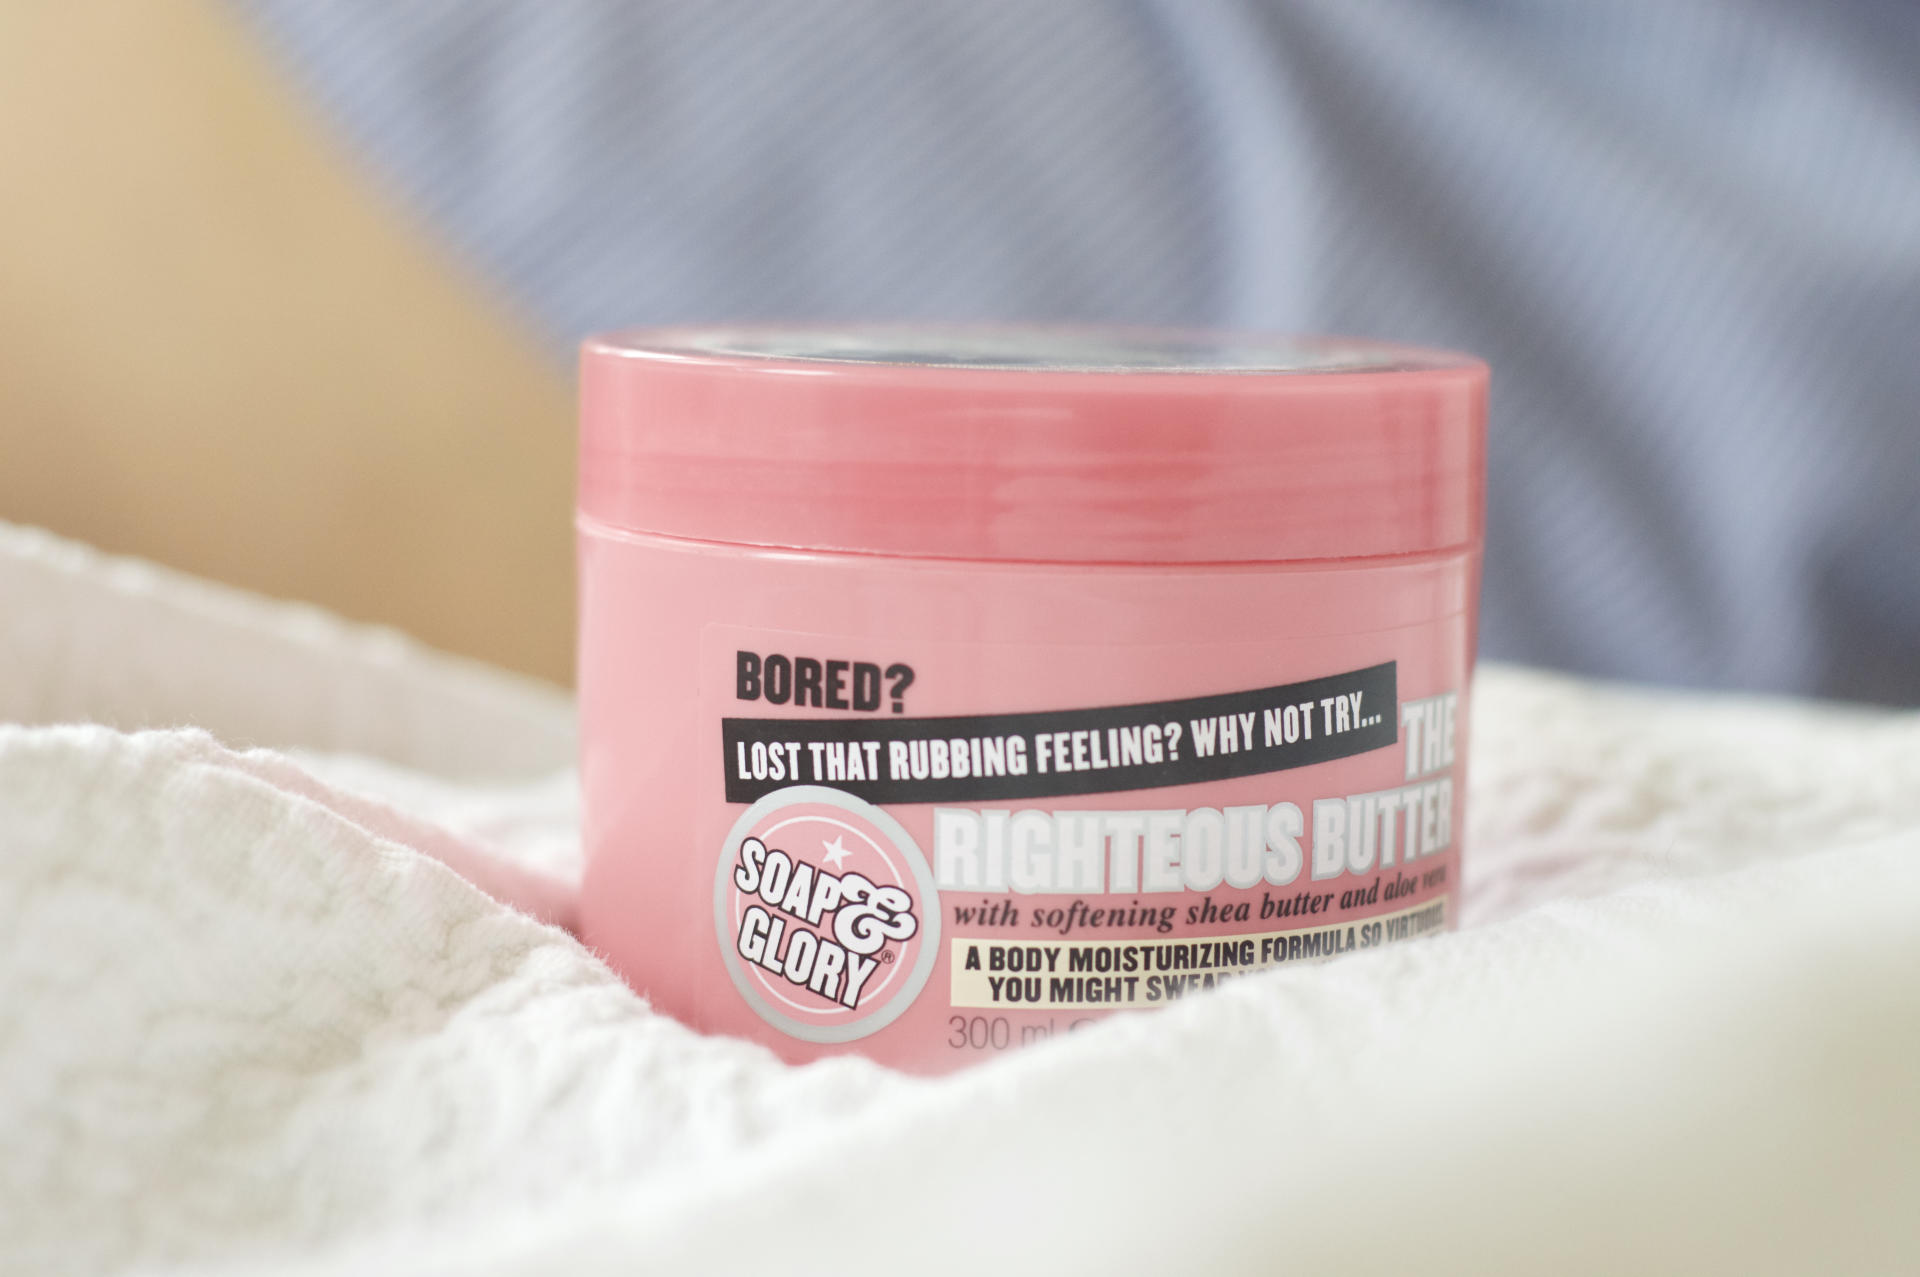 Made From Beauty Soap & Glory The Righteous Butter